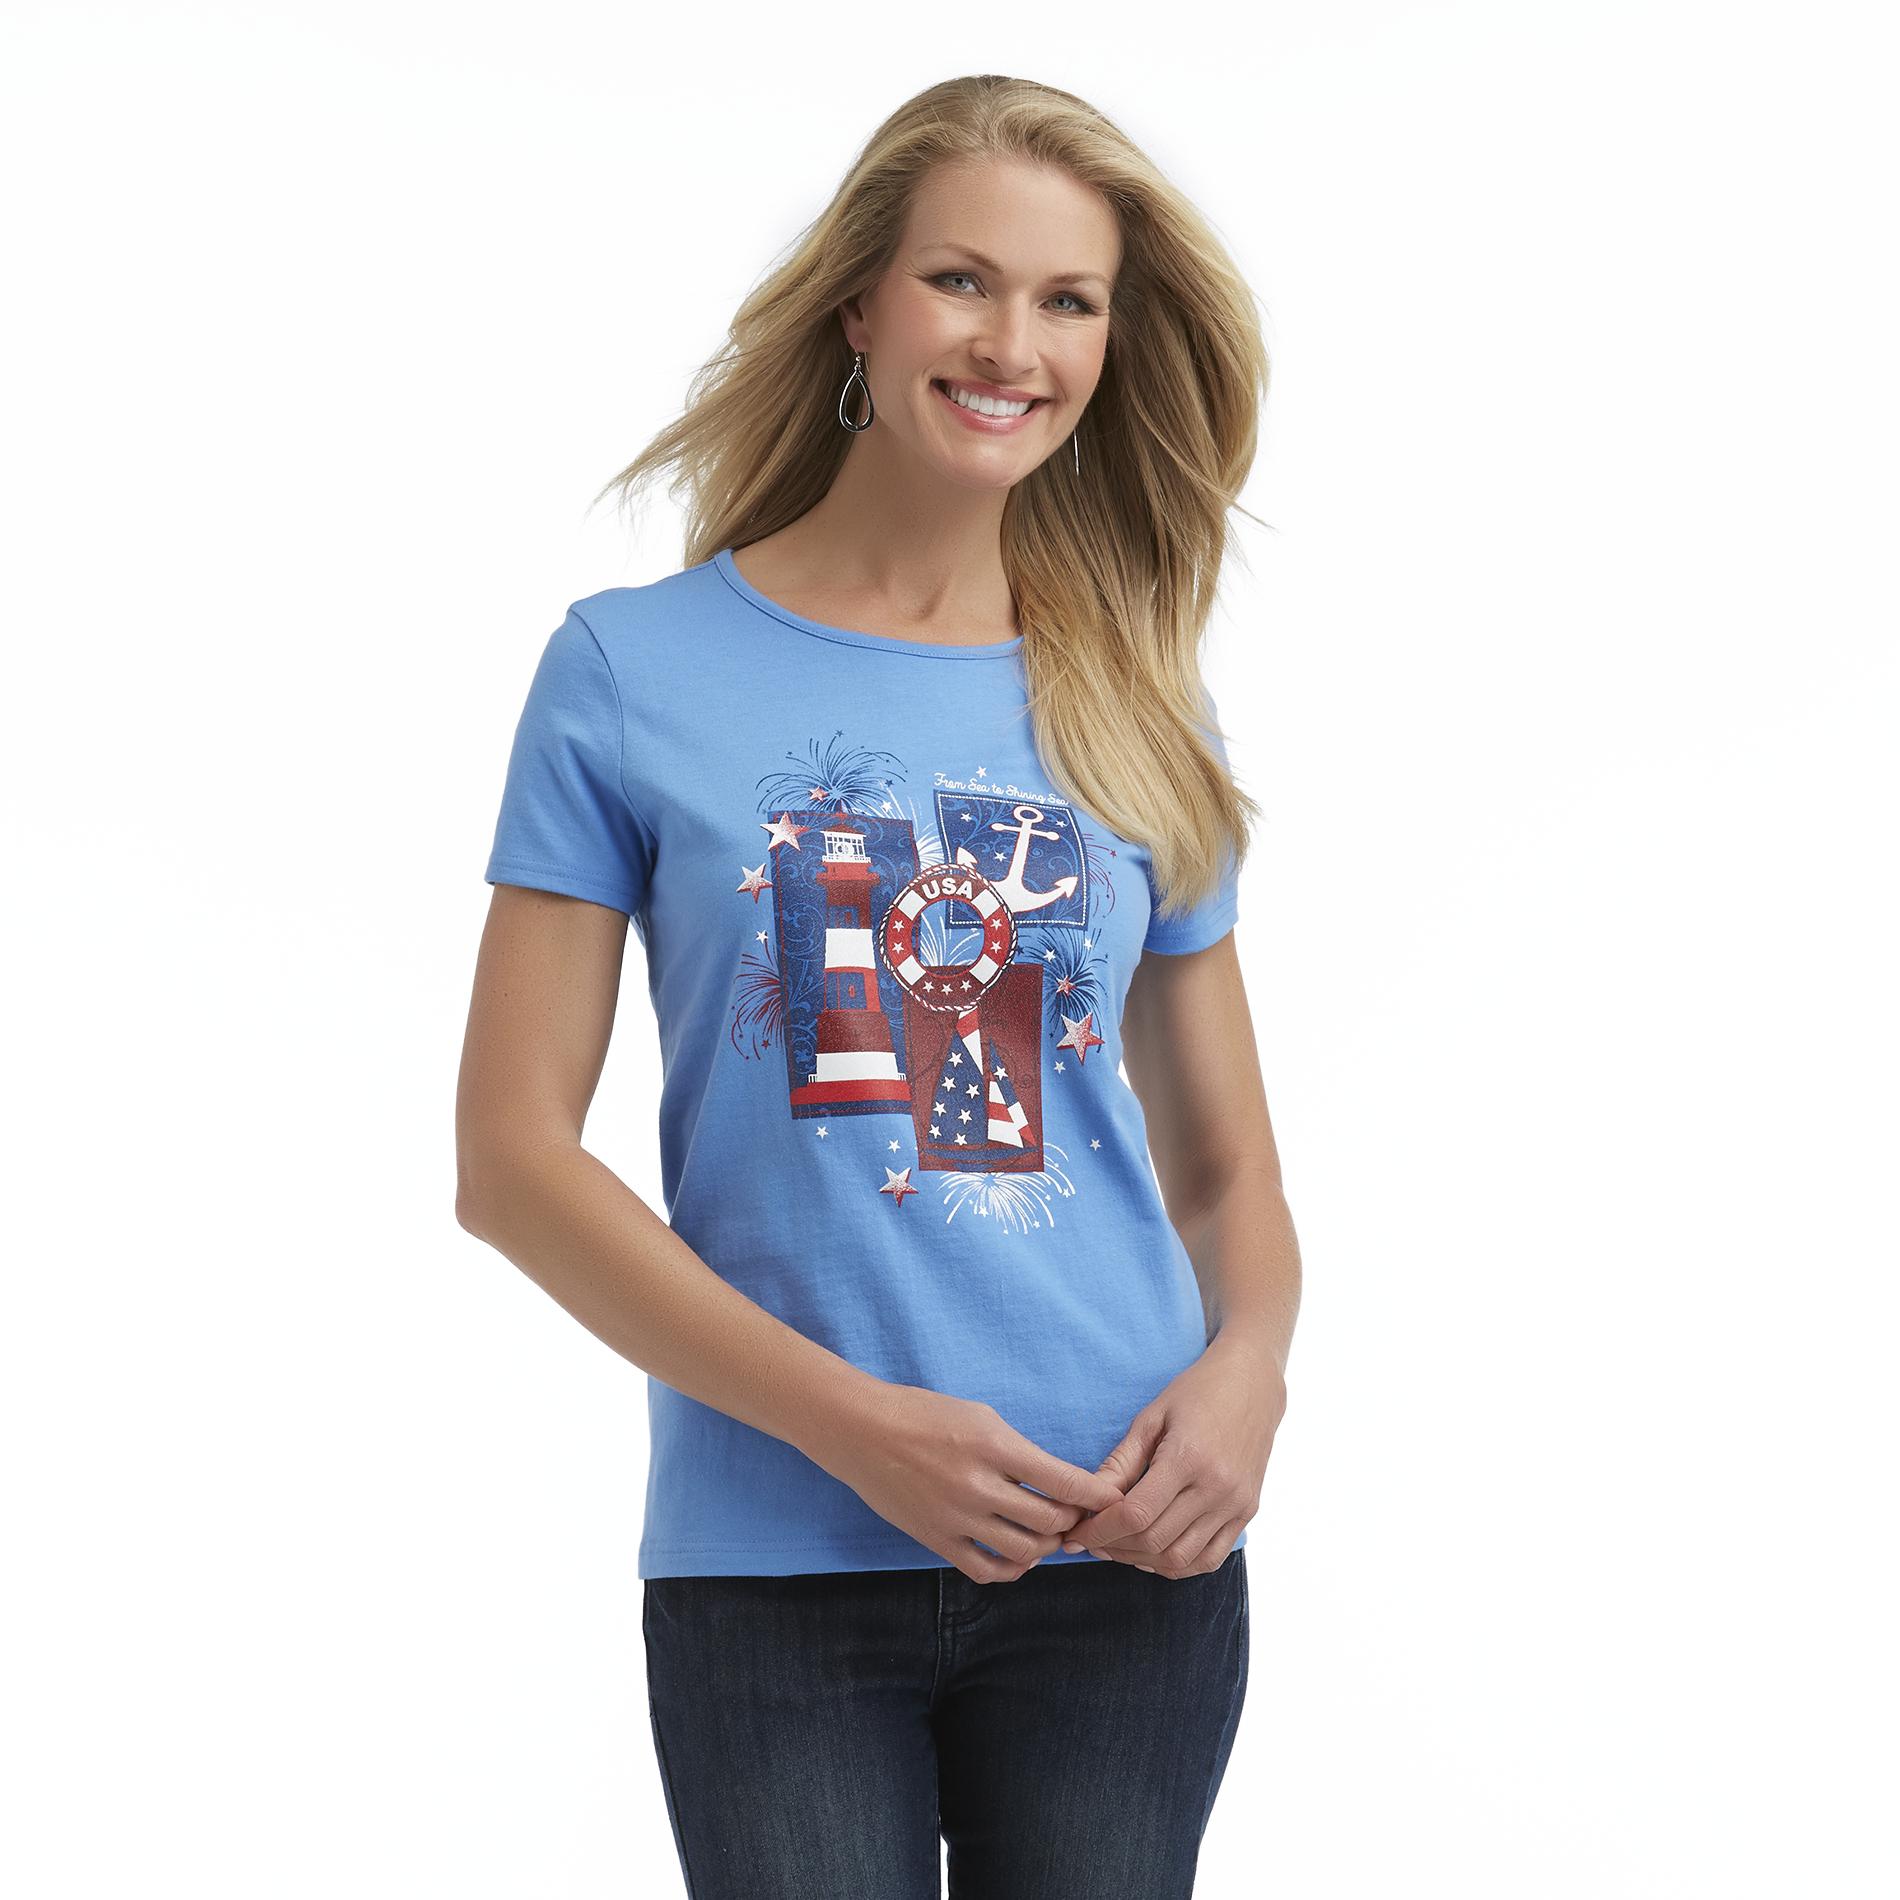 Holiday Editions Women's Graphic T-Shirt - Americana